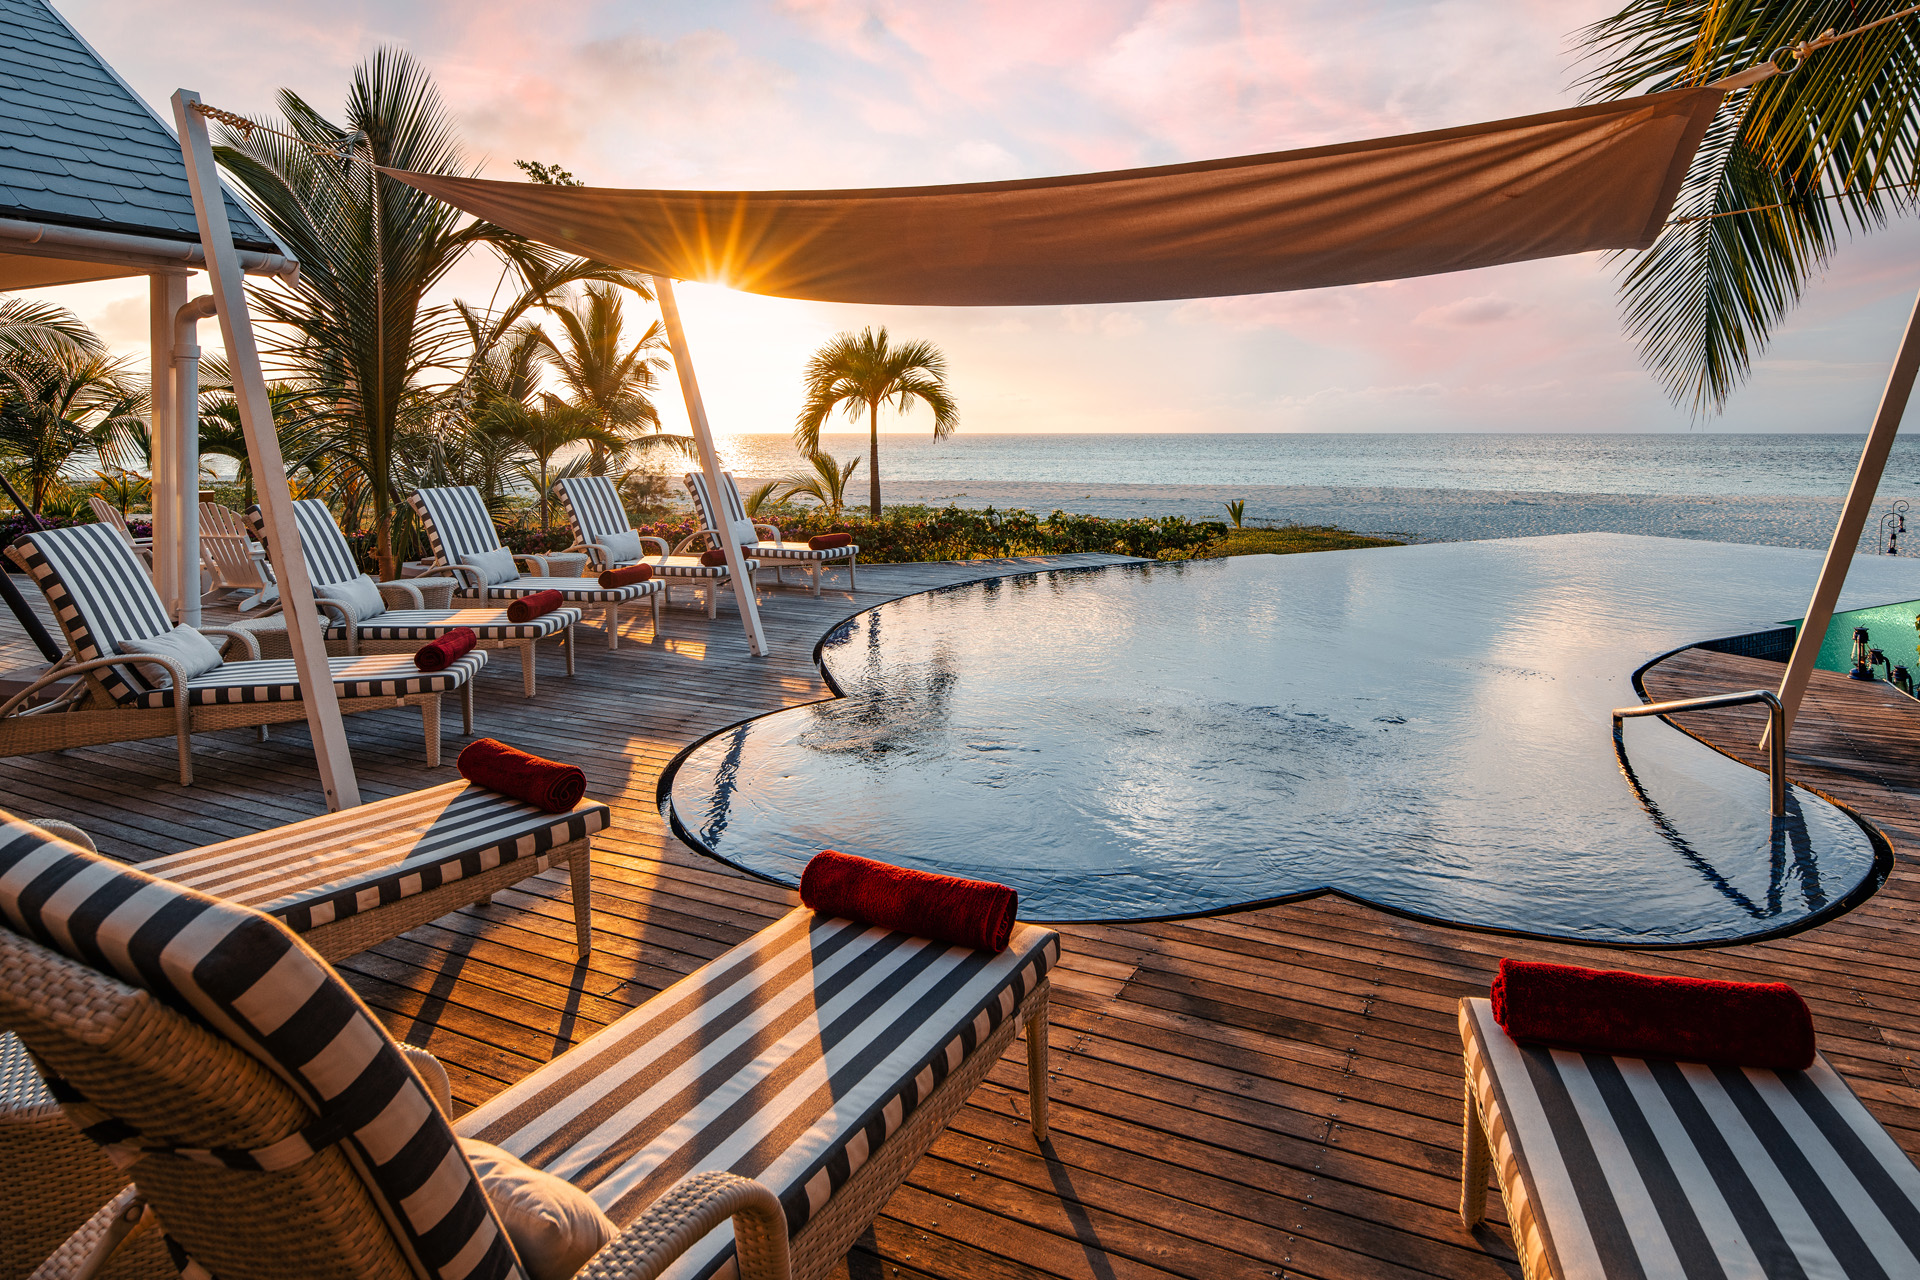 An infinity pool at dusk surrounded by striped deck chairs and palm trees